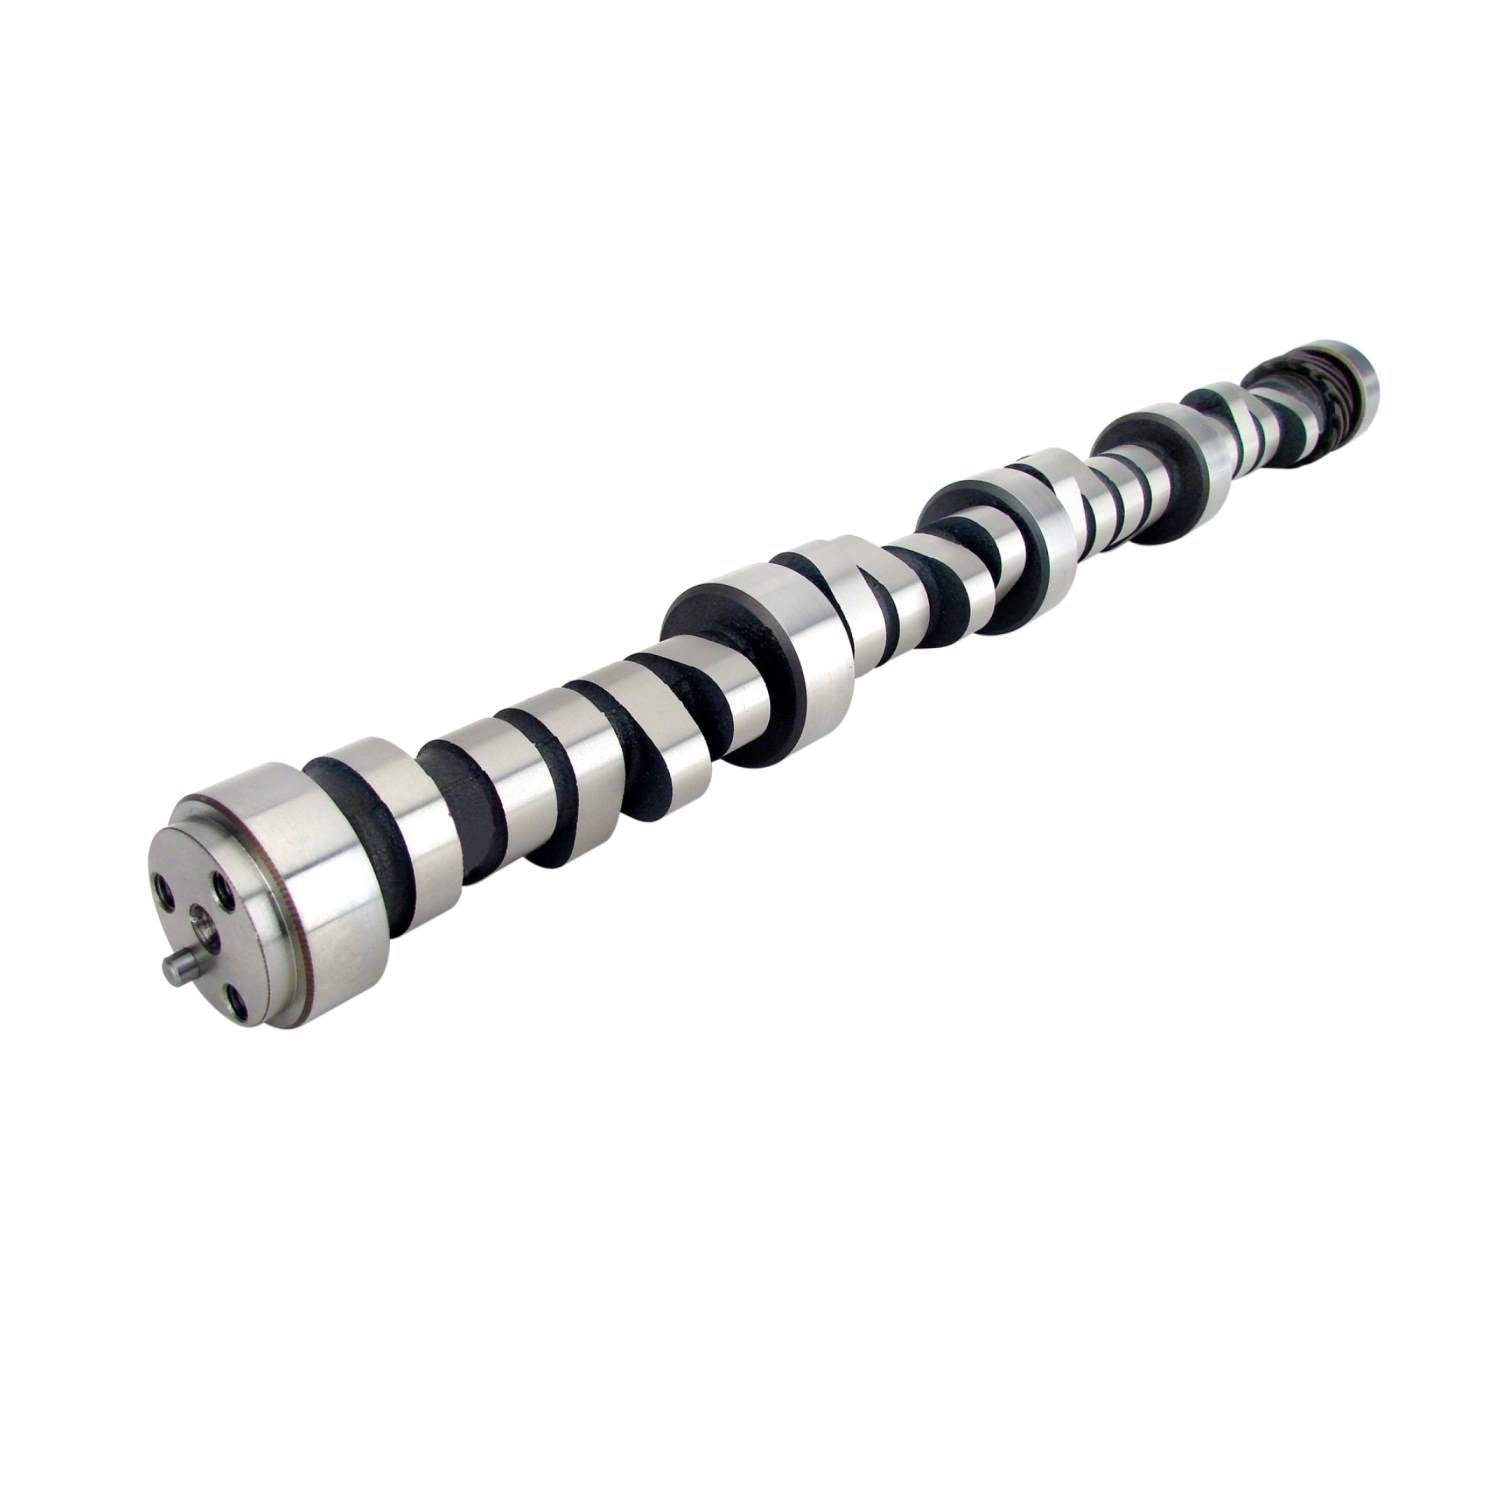 Competition Cams Drag Race Camshaft Best in Super Comp or Super Gas 01-710-9